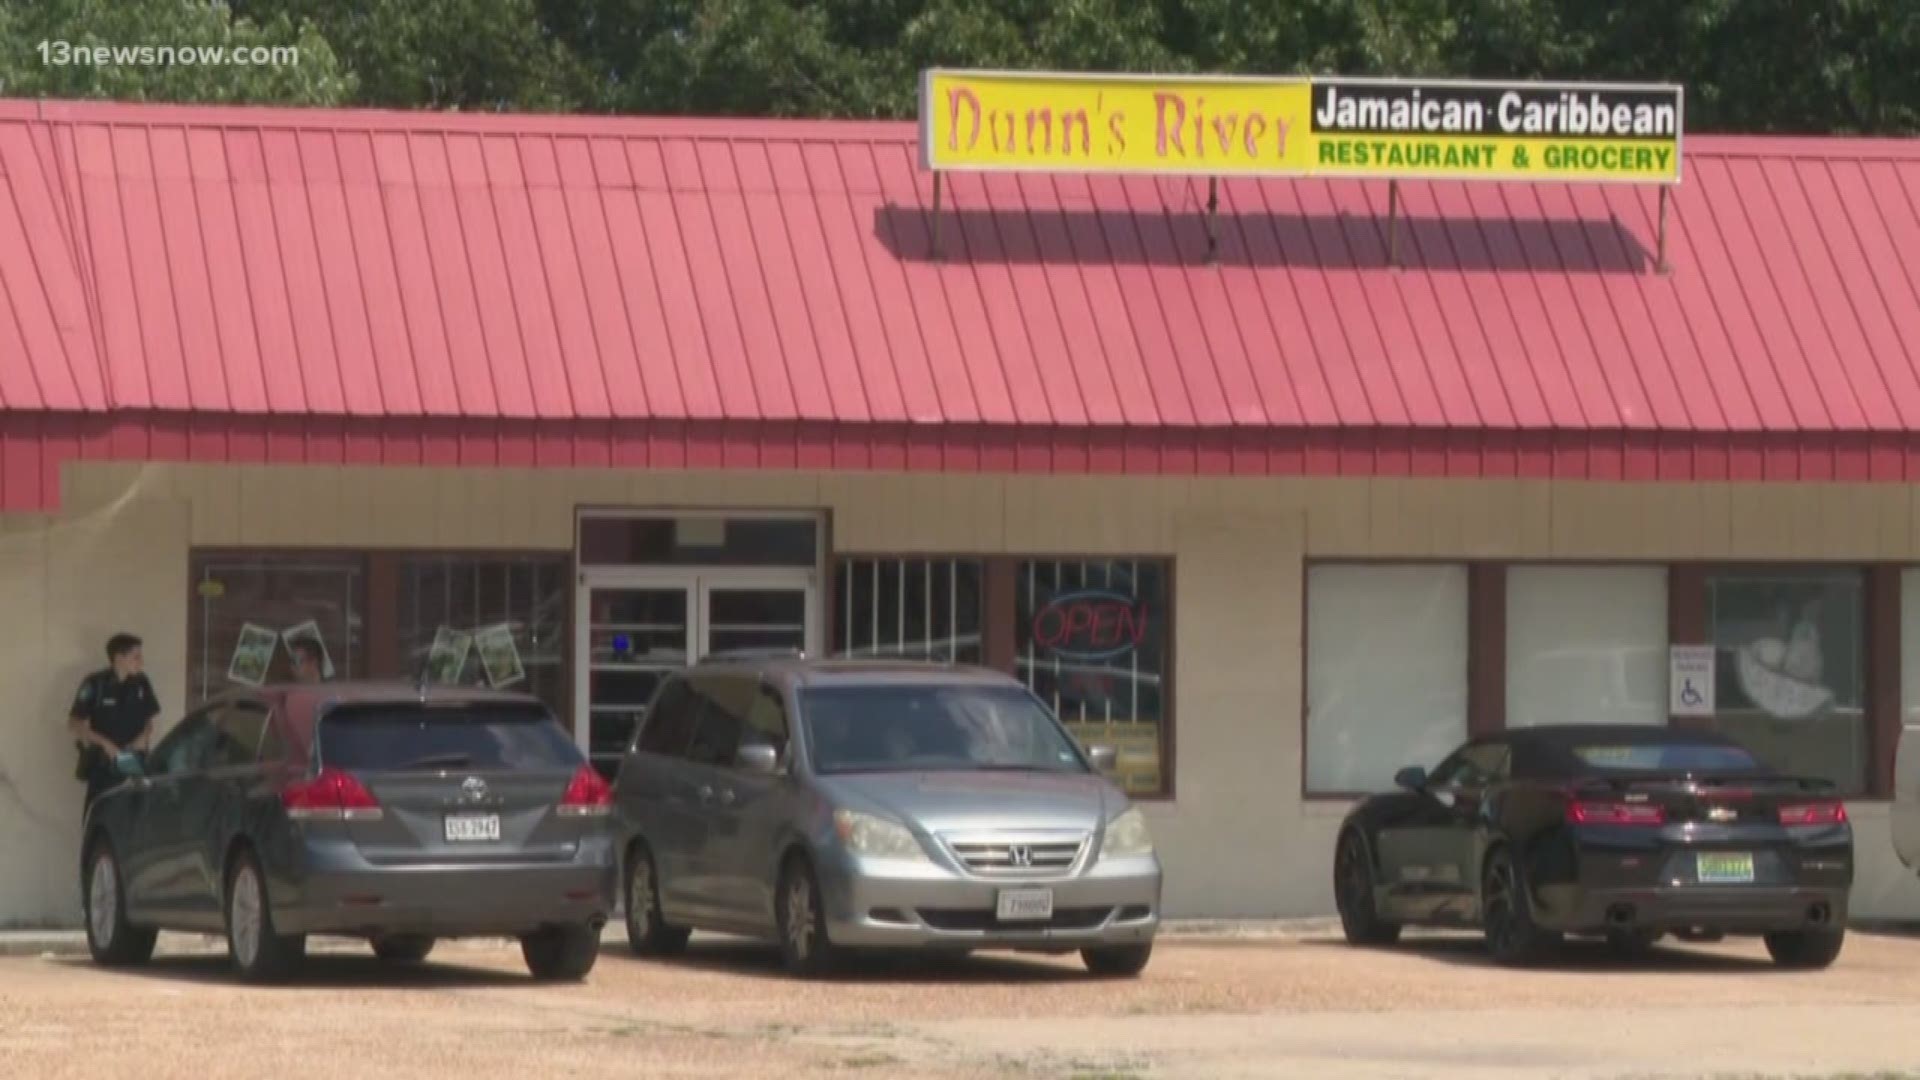 Police said two people are dead after a shooting took place at Dunn's River Jamaican-Caribbean Restaurant and Grocery in Newport News. One person has been arrested according to police.